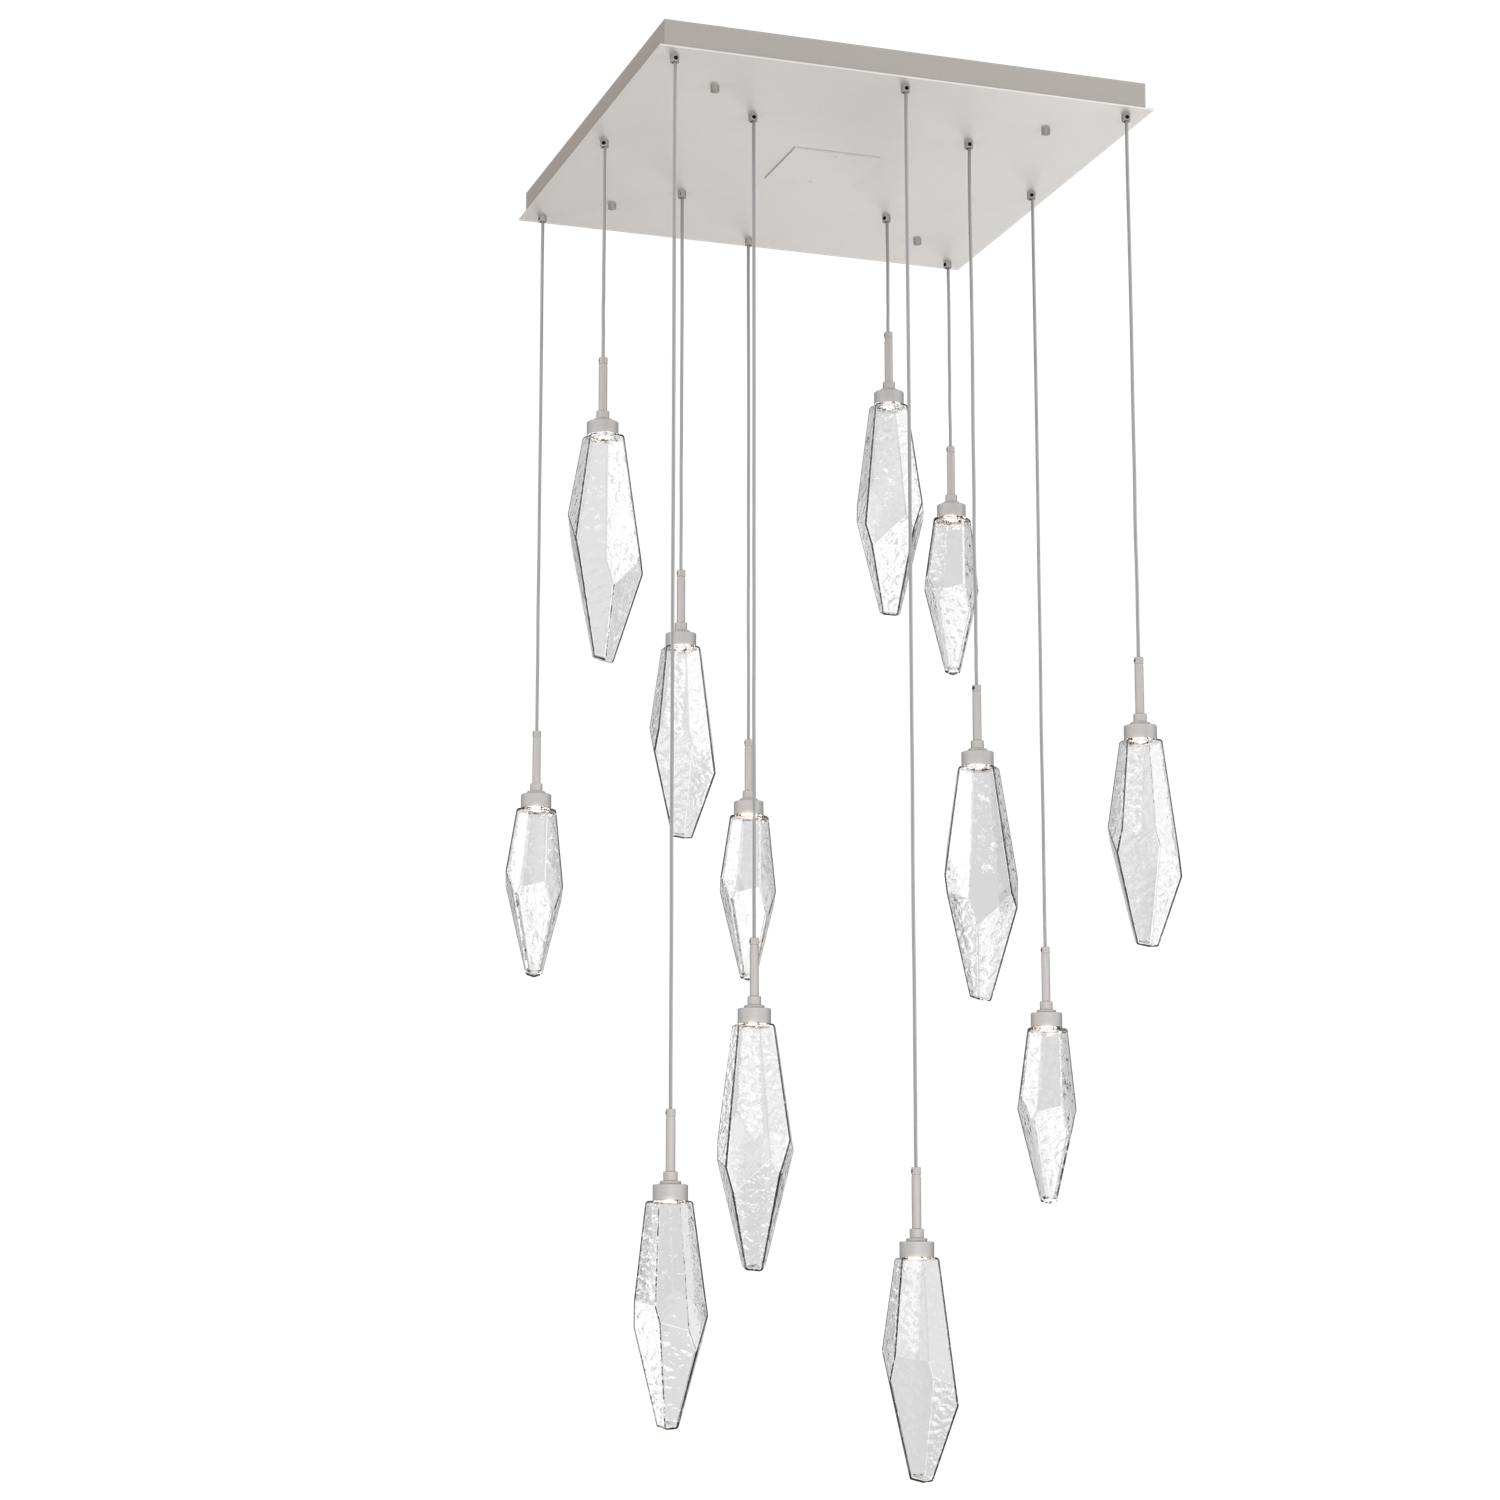 CHB0050-12-BS-CC-Hammerton-Studio-Rock-Crystal-12-light-square-pendant-chandelier-with-beige-silver-finish-and-clear-glass-shades-and-LED-lamping